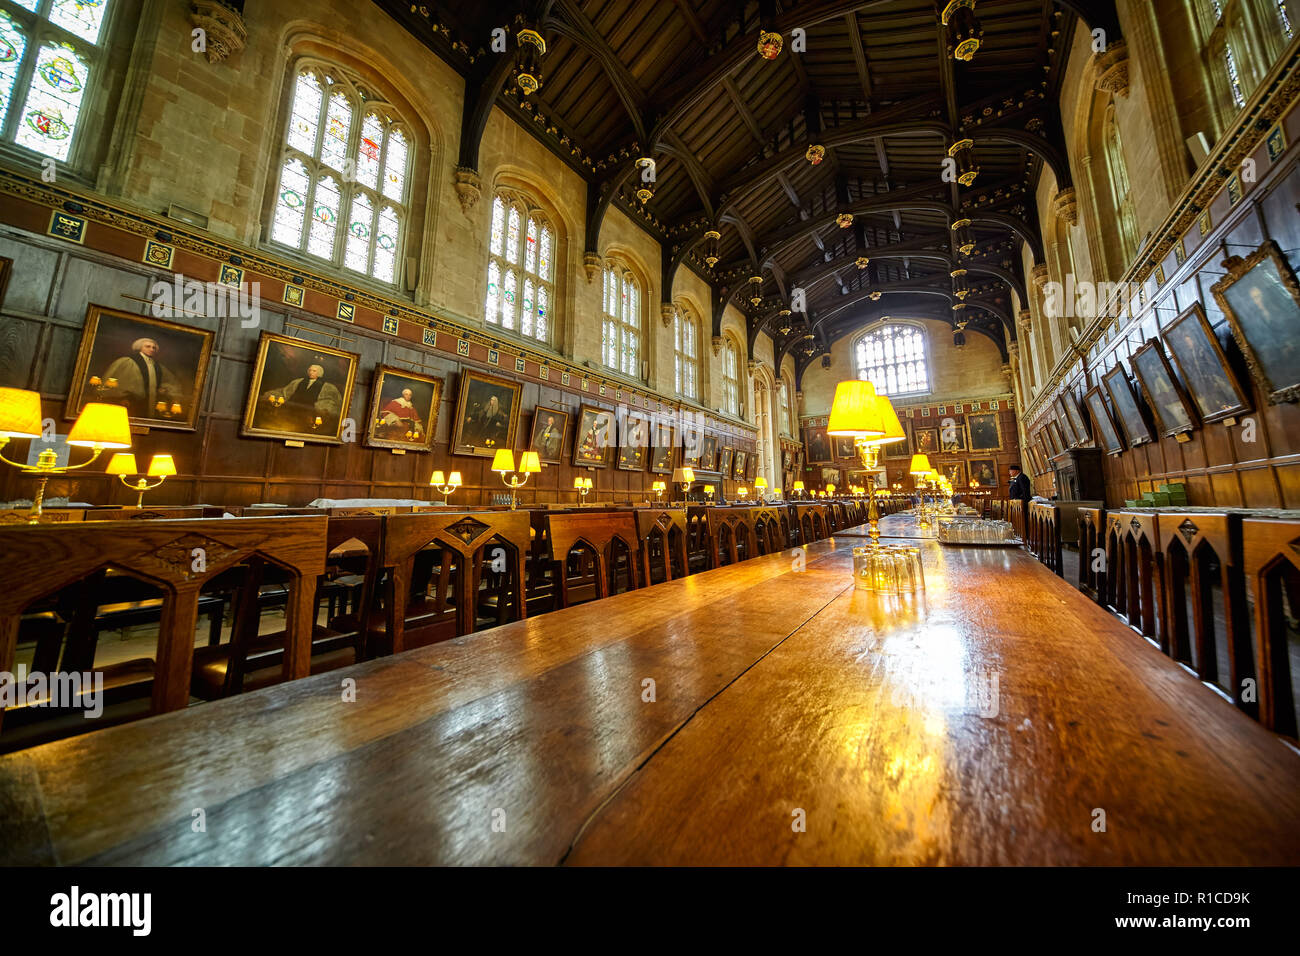 OXFORD, ENGLAND – MAY 15, 2009: The interior of the Dining Hall (Ante-Hall) of Christ Church. Oxford University. England Stock Photo